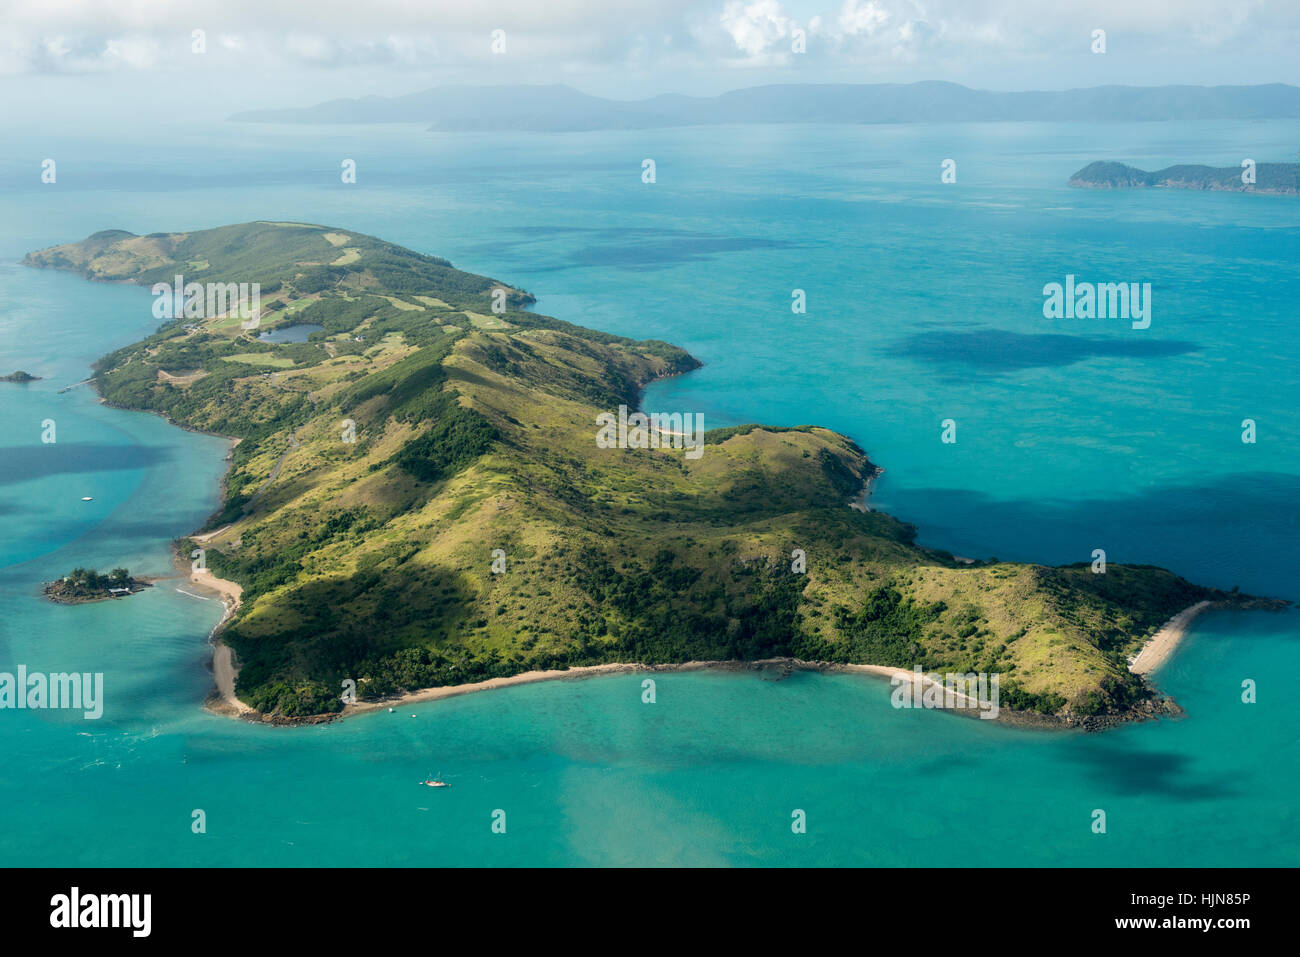 Aerial view of the South Molle in the Whitsunday Islands, taken from a light aircraft scenic flight, Queensland Australia Stock Photo